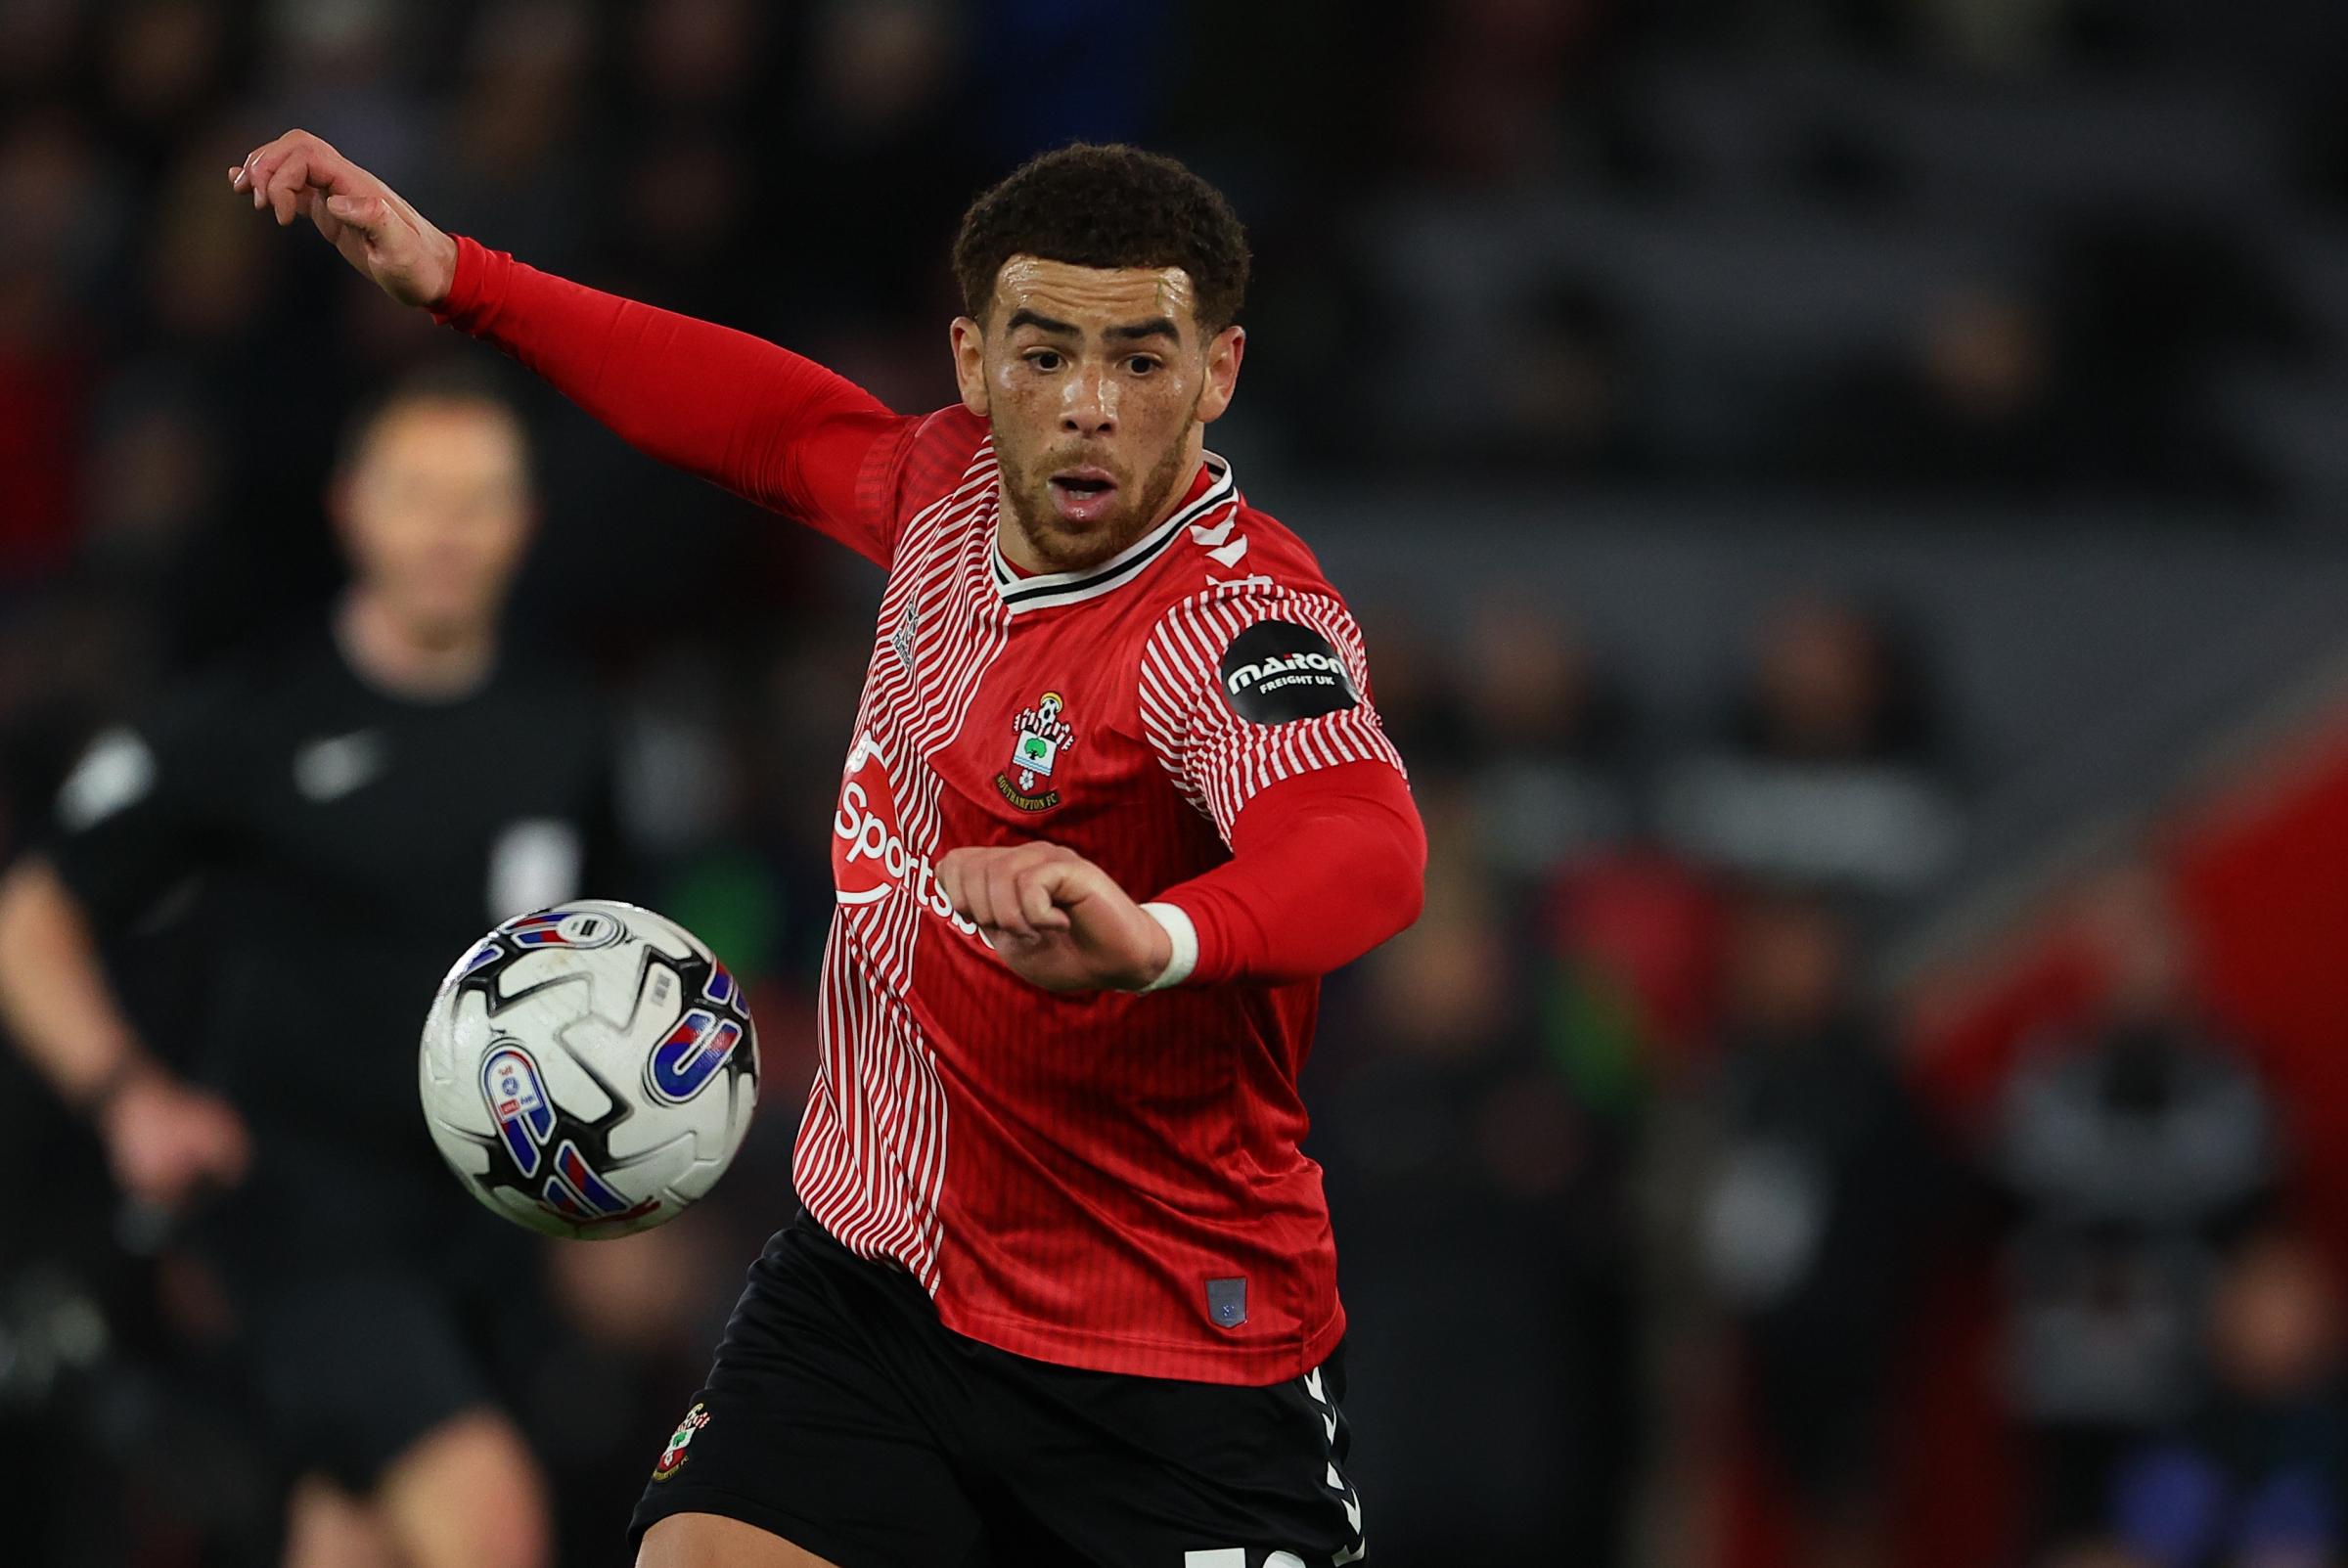 Southampton's Martin gives latest on Adams fitness for West Brom clash